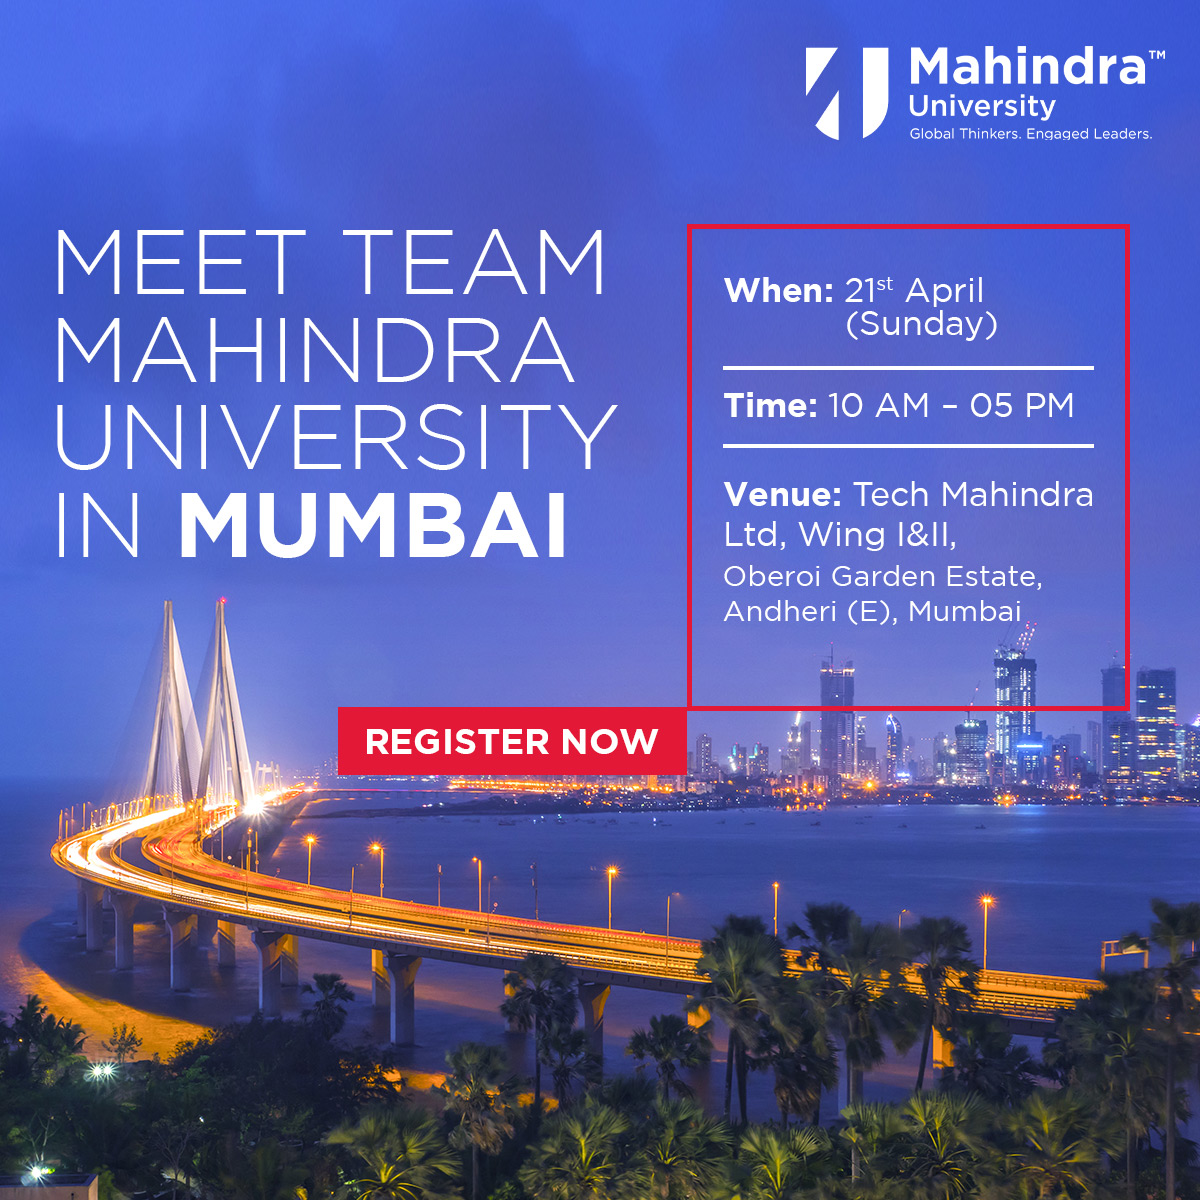 Gain a comprehensive understanding of #MahindraUniversity at our Mumbai Info-Session!  
Connect with our admissions team and faculty on April 21st (10 AM - 5 PM) at Tech Mahindra Ltd, Oberoi Garden Estate, Andheri (E).  
Register now: bit.ly/3xywxqy

#InfoSession